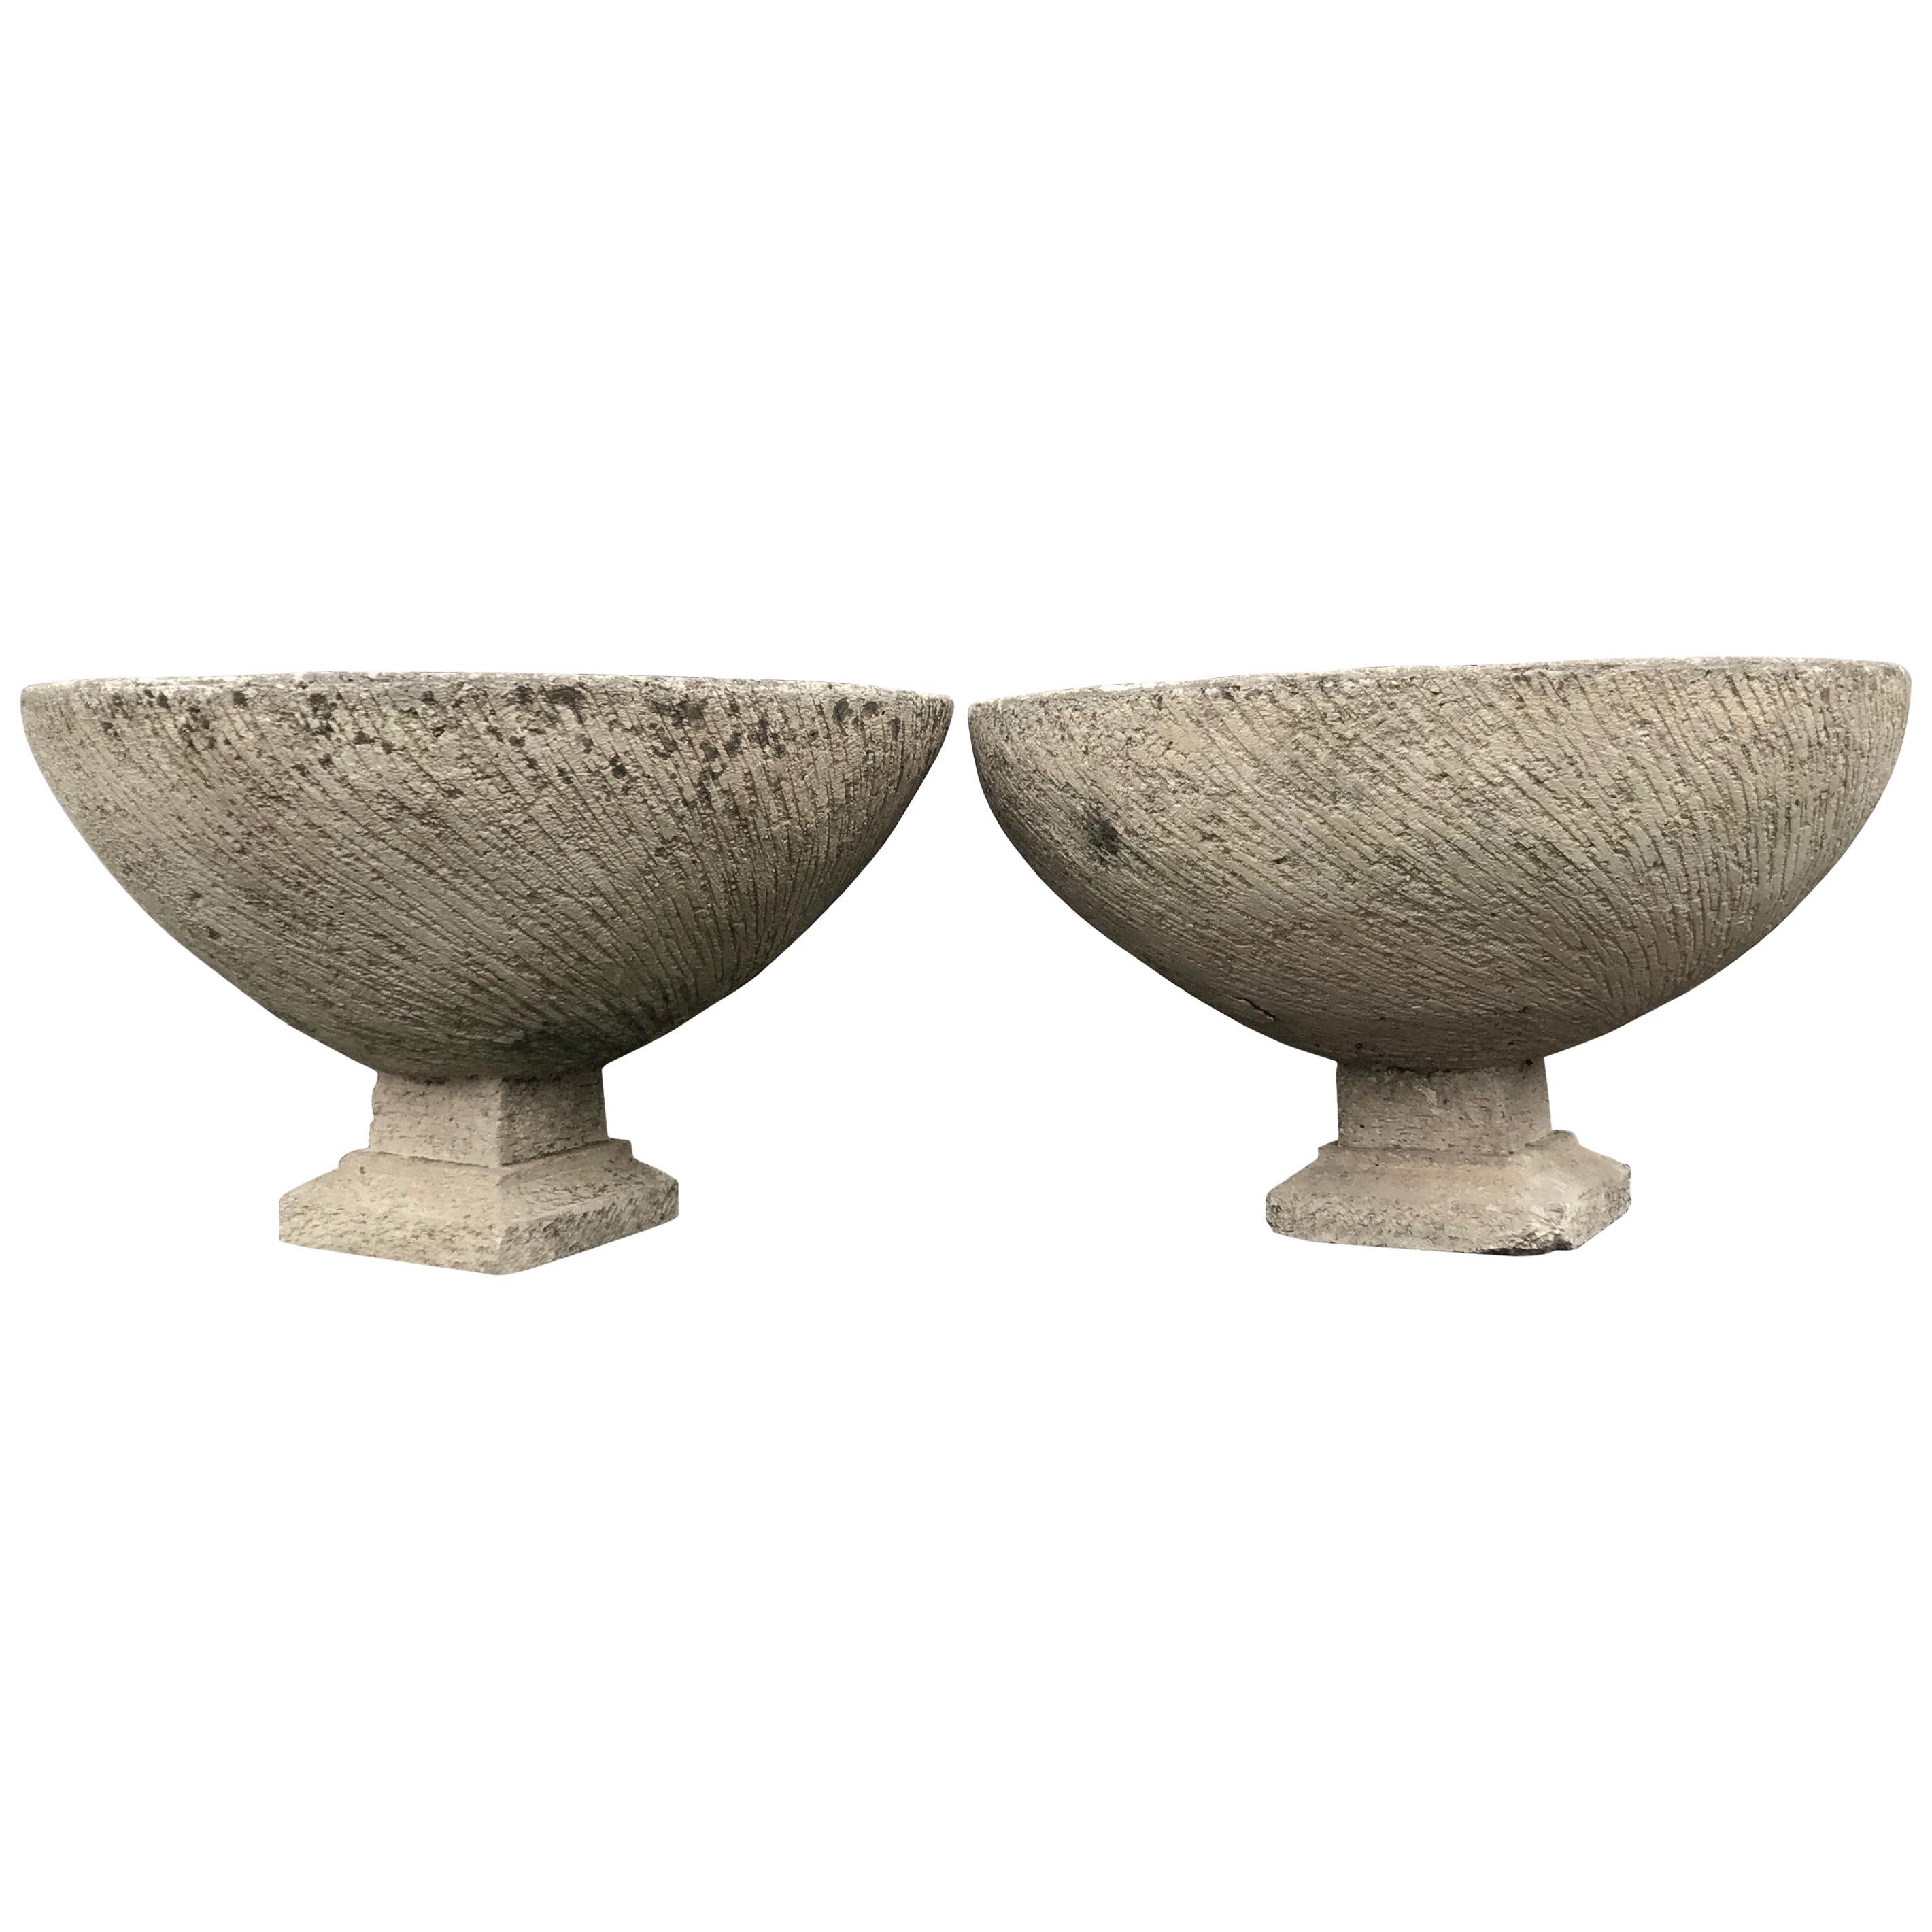 Pair of Large French Cast Stone Bowl Planters on Integral Feet #2